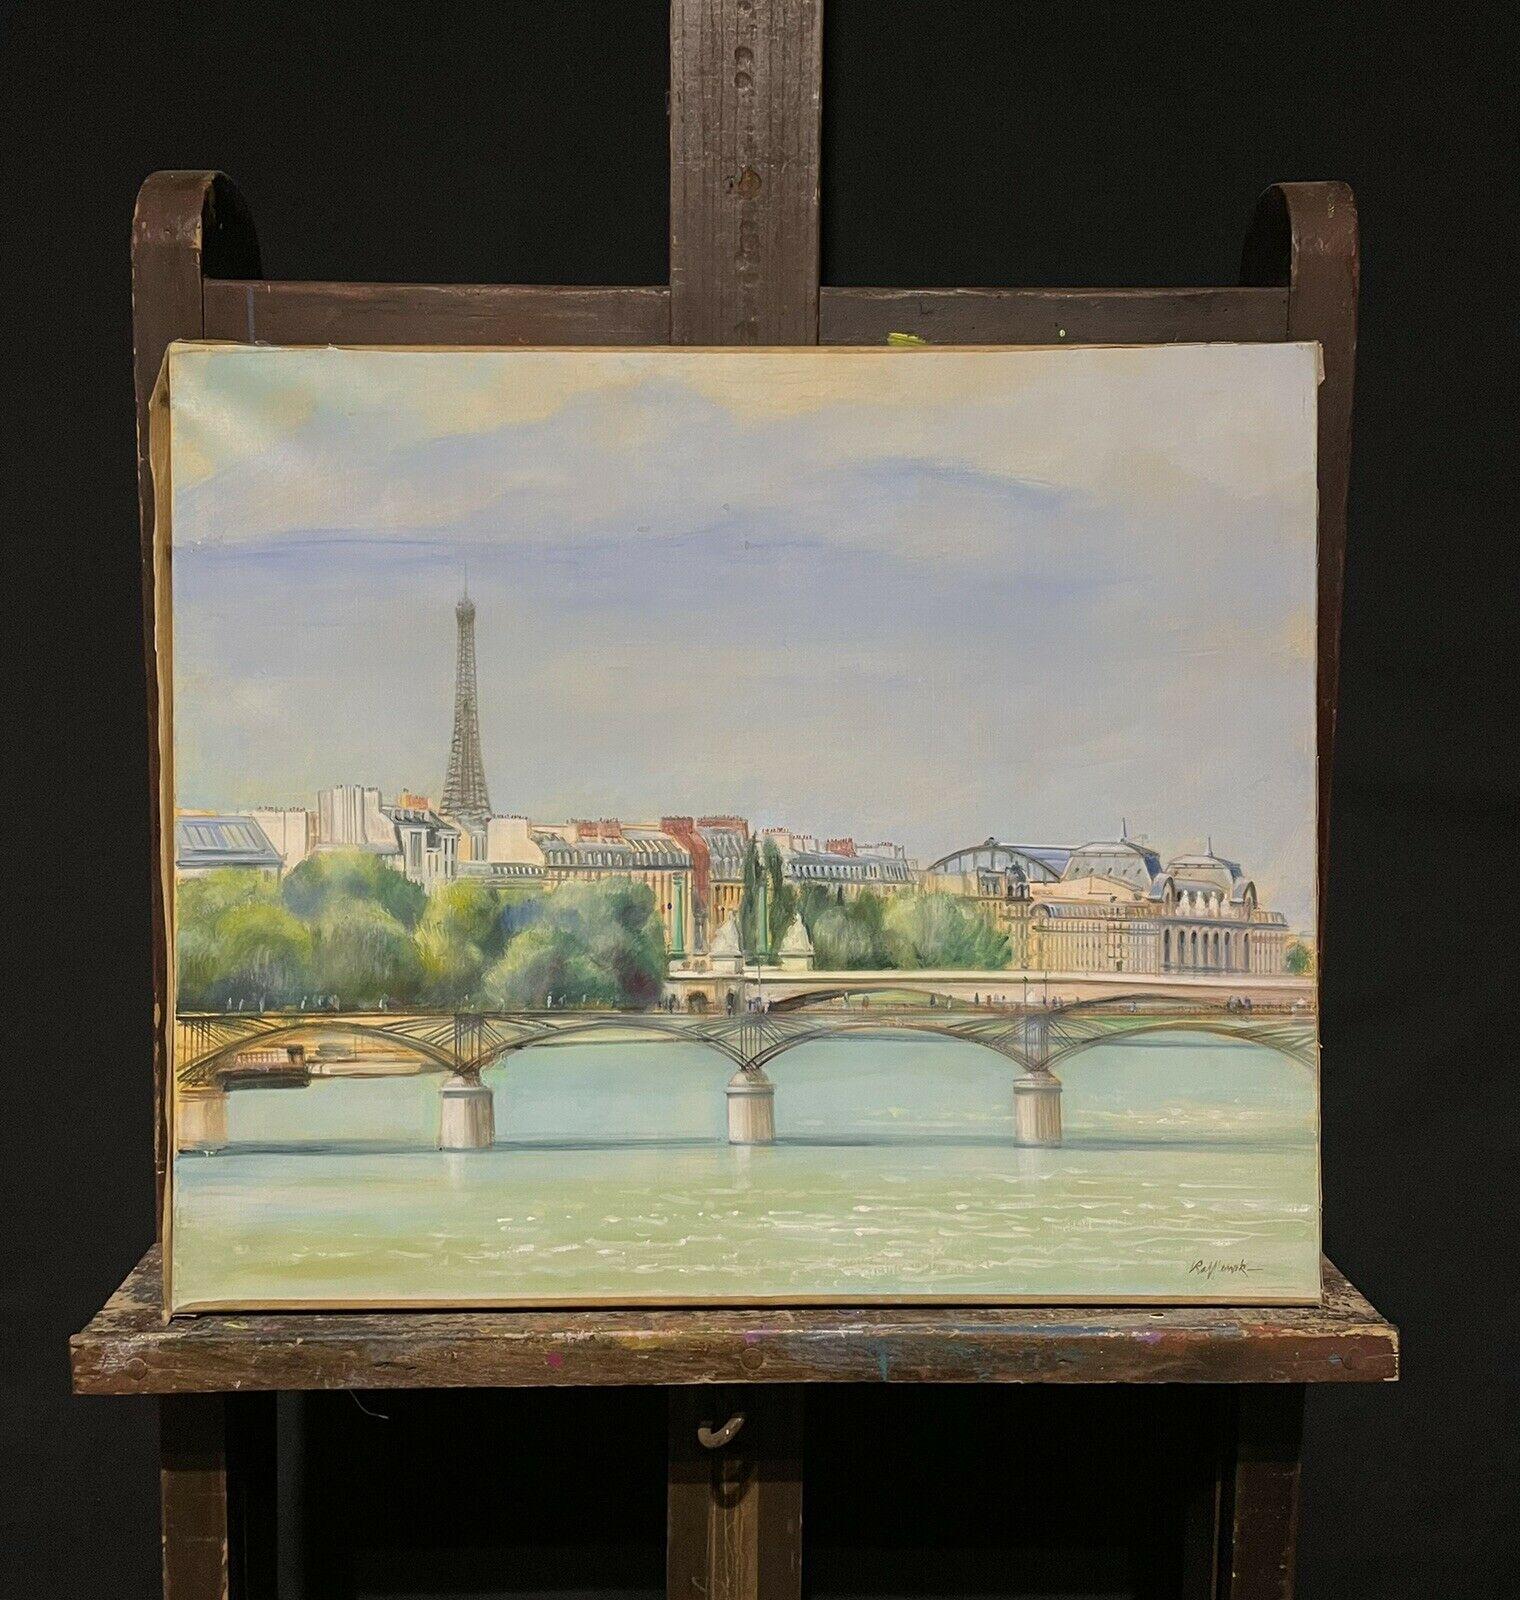 Le Pont des Arts Paris River Seine with a view over the Eiffel Tower, French Oil - Painting by French School